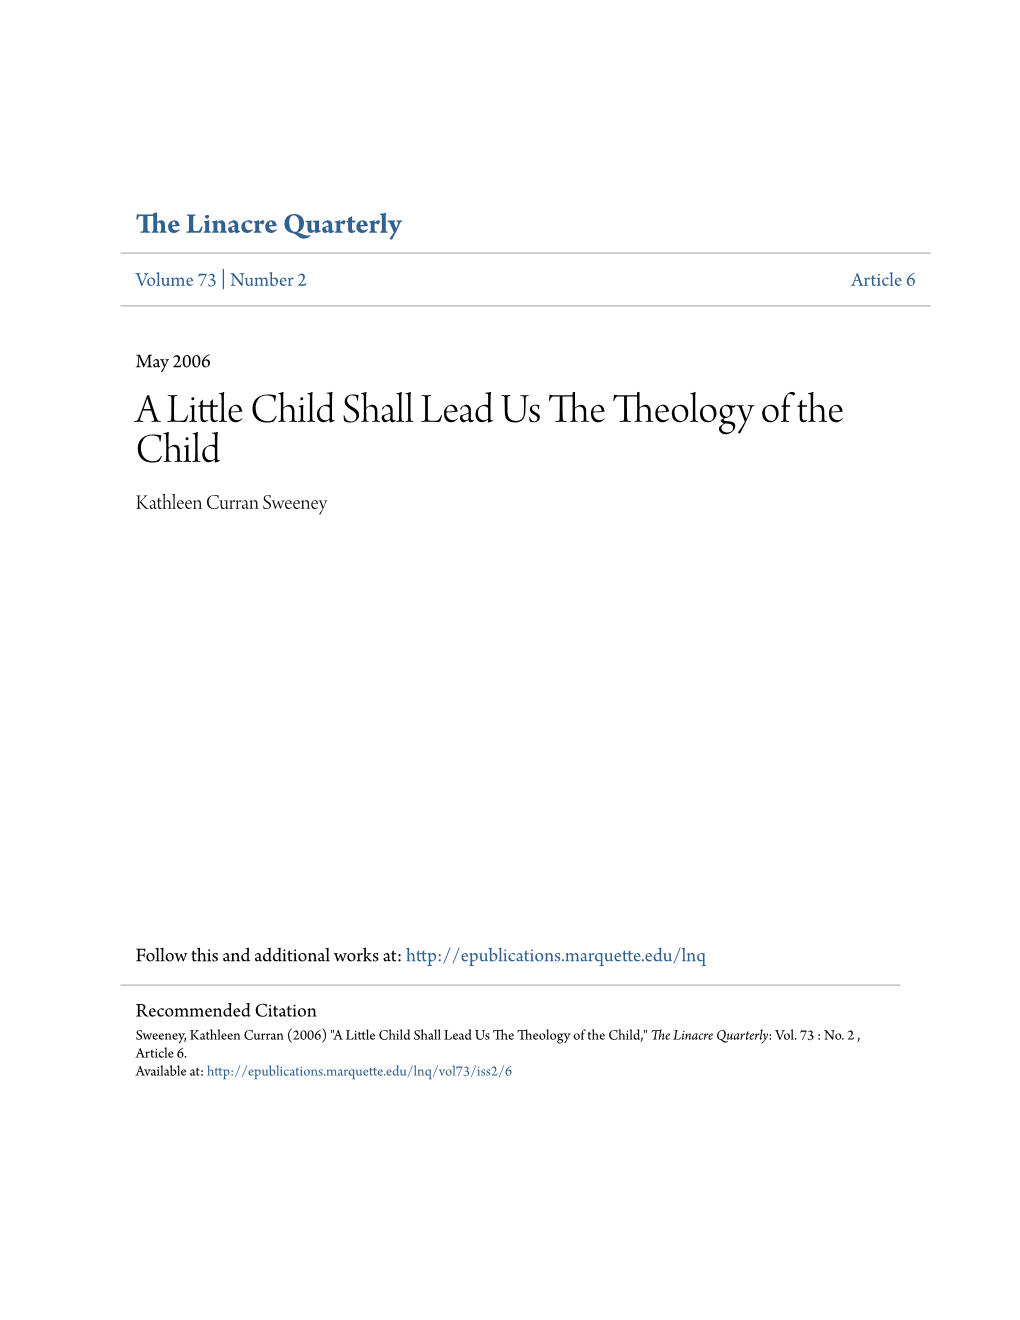 A Little Child Shall Lead Us the Theology of the Child